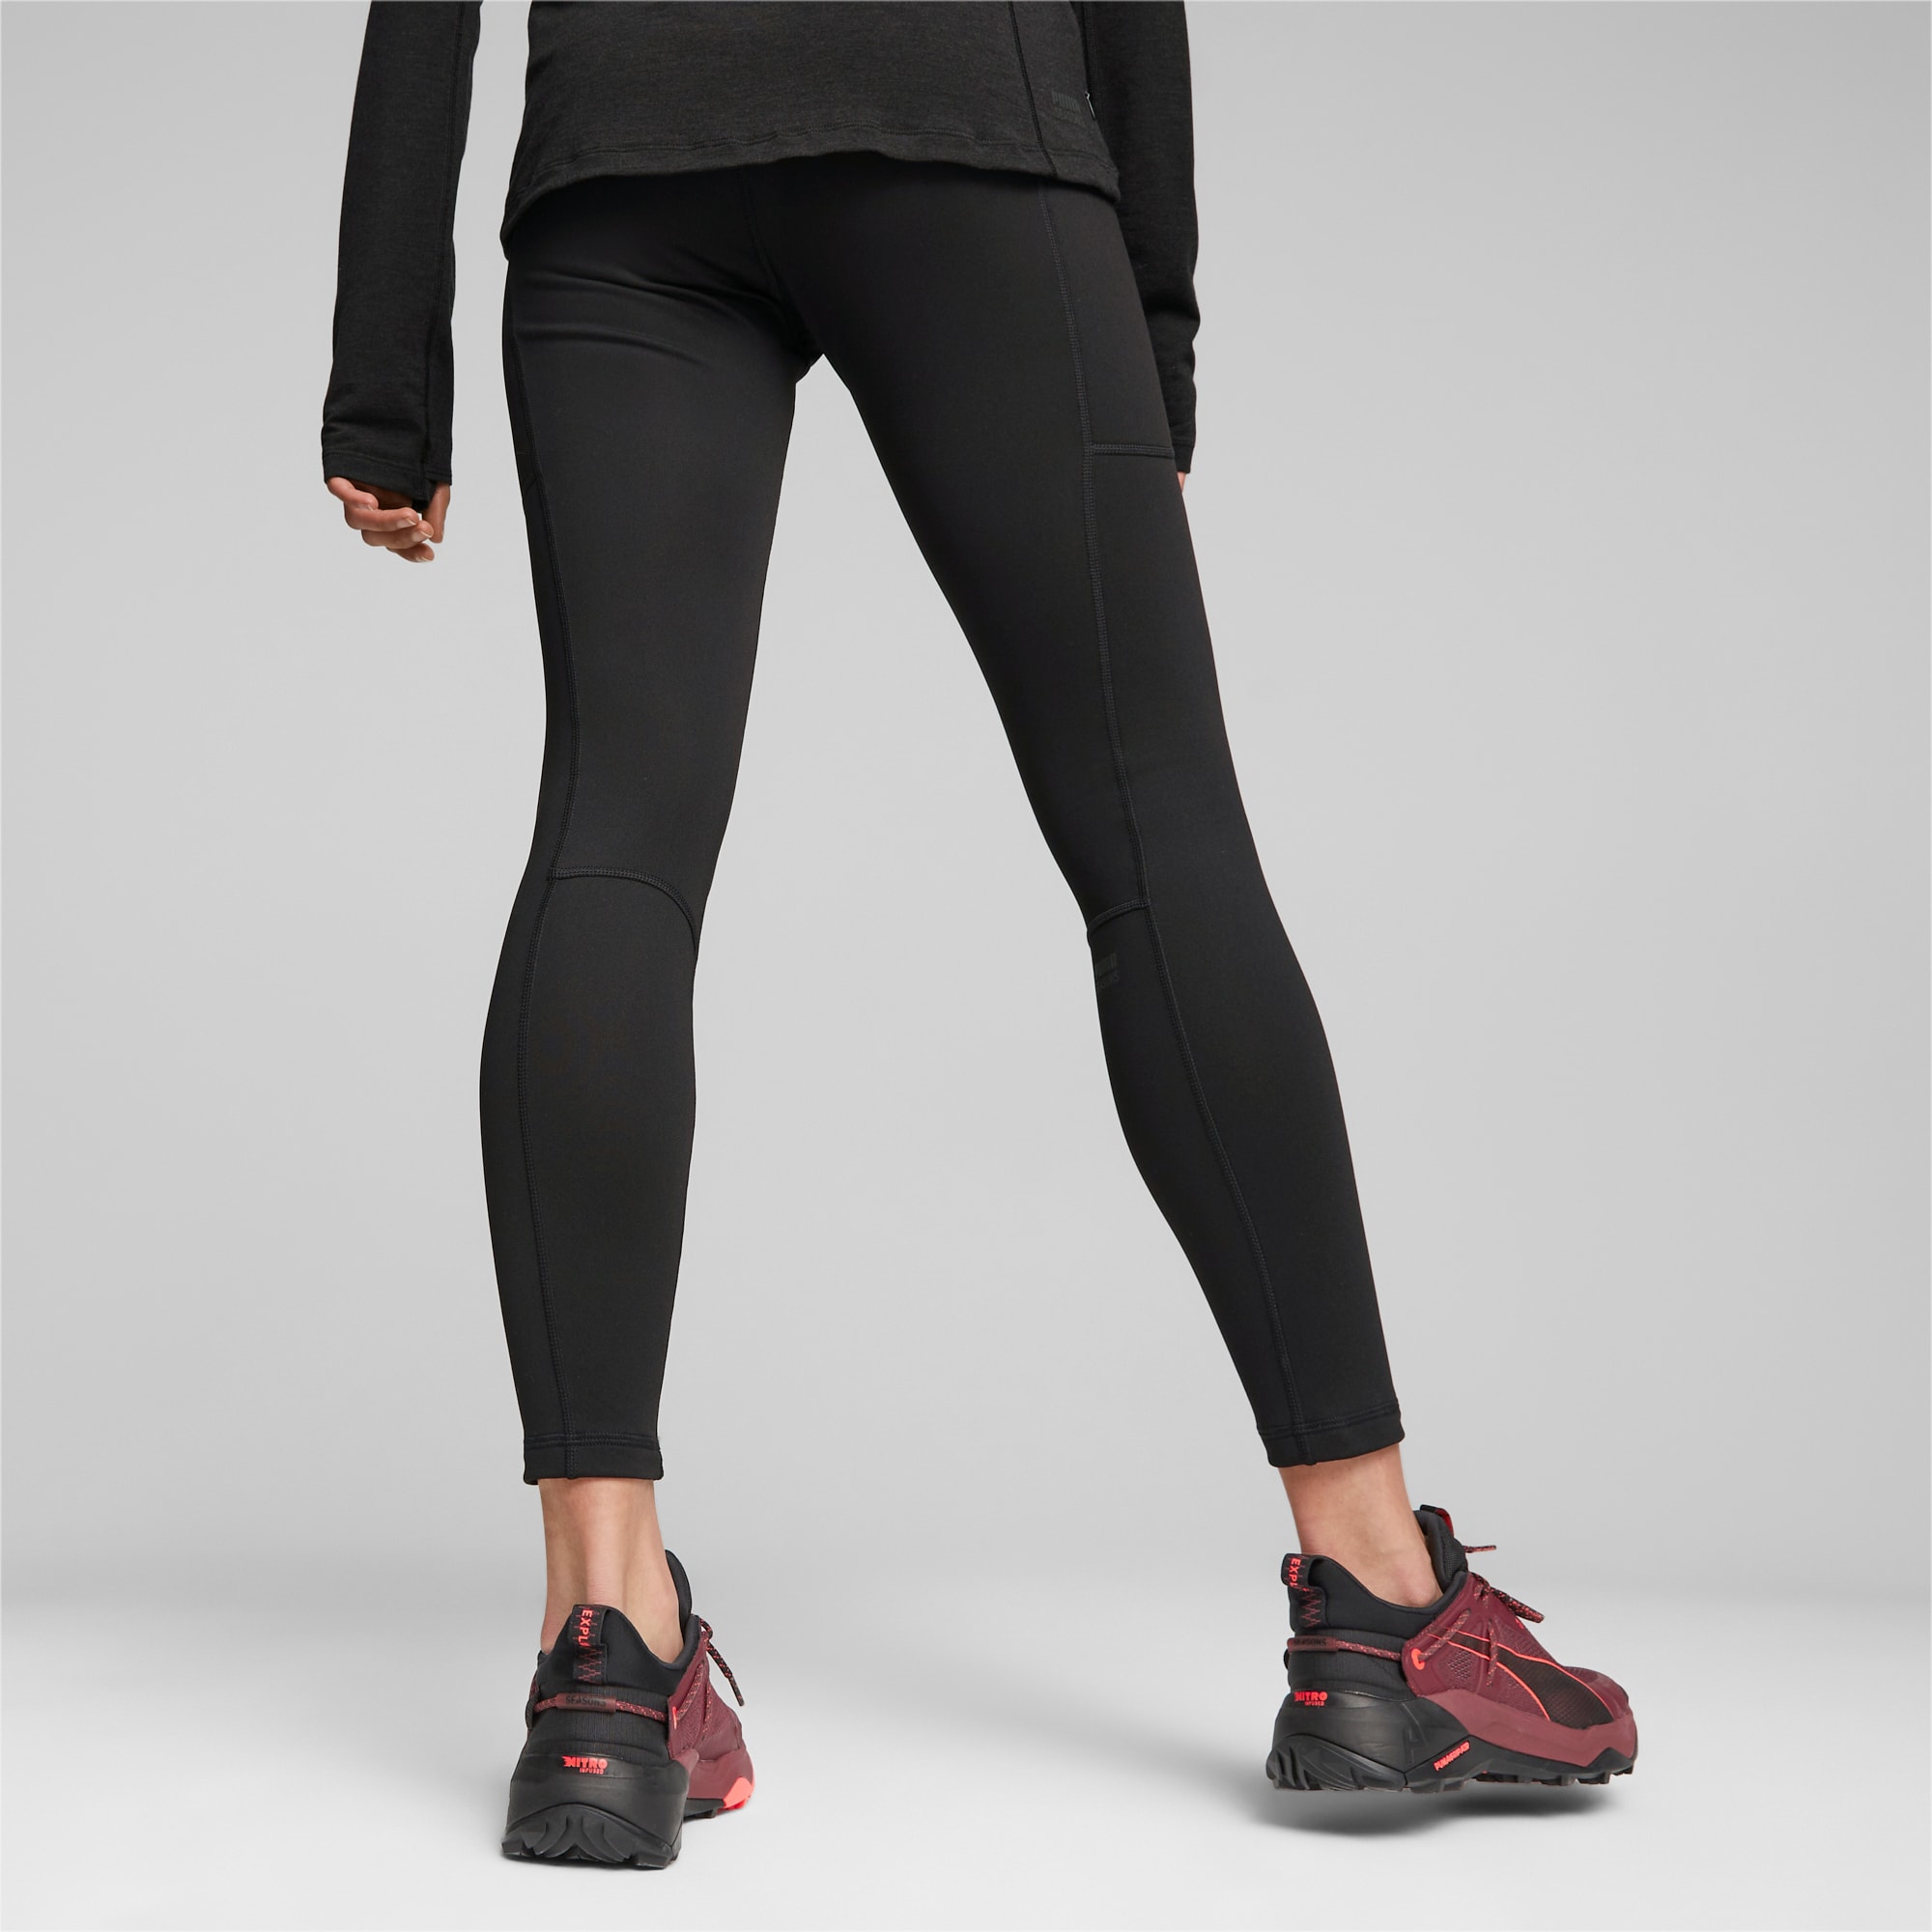 Women's Workout and Running Tights